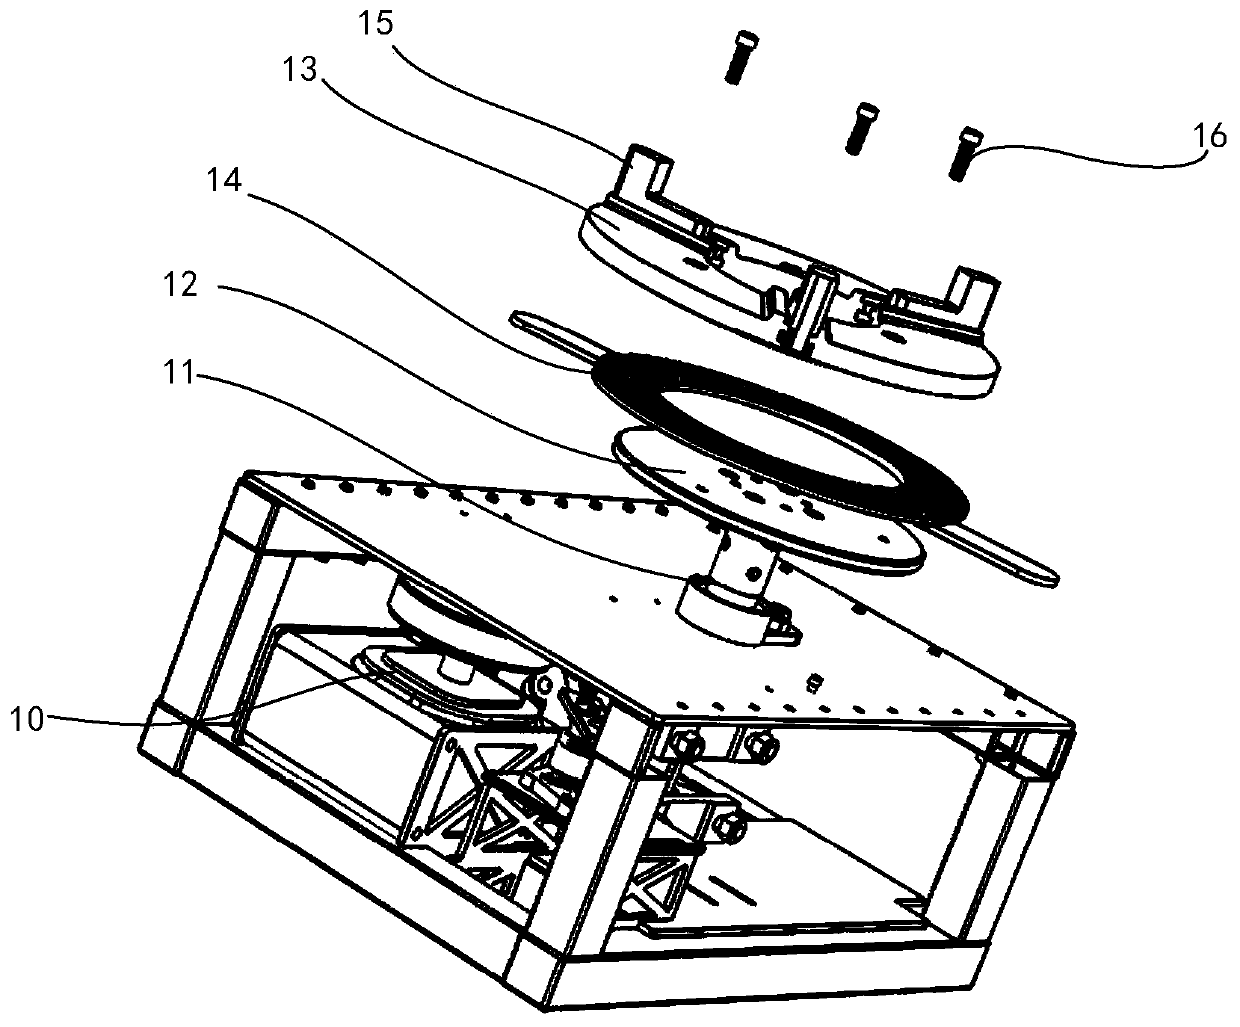 Rotary-table fixture